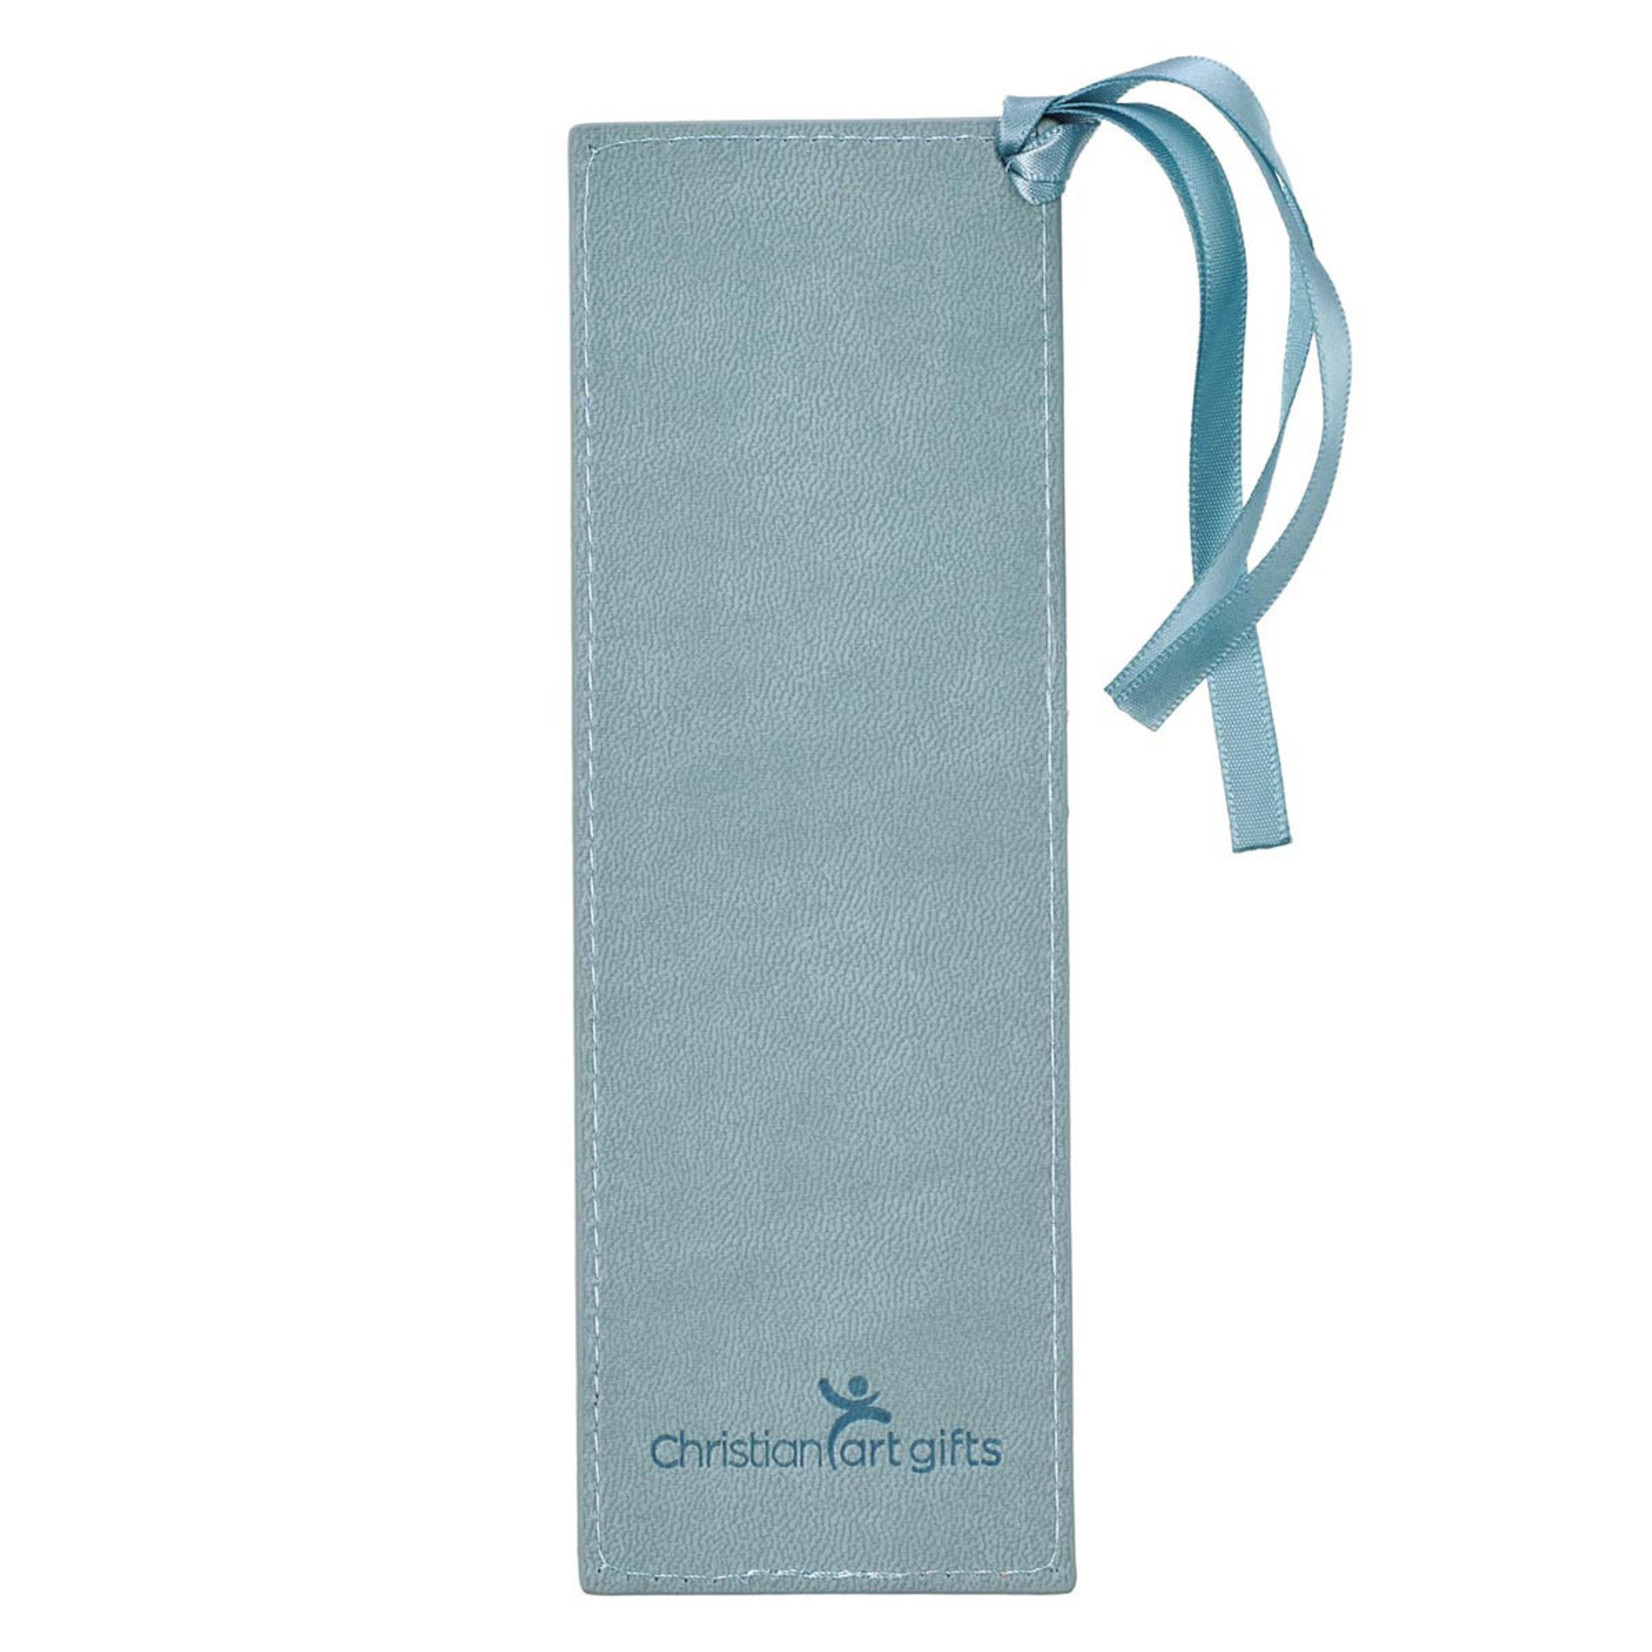 Christian Art Gifts Hope & a Future - Powder Blue Faux Leather Bookmark - Jeremiah 29:11